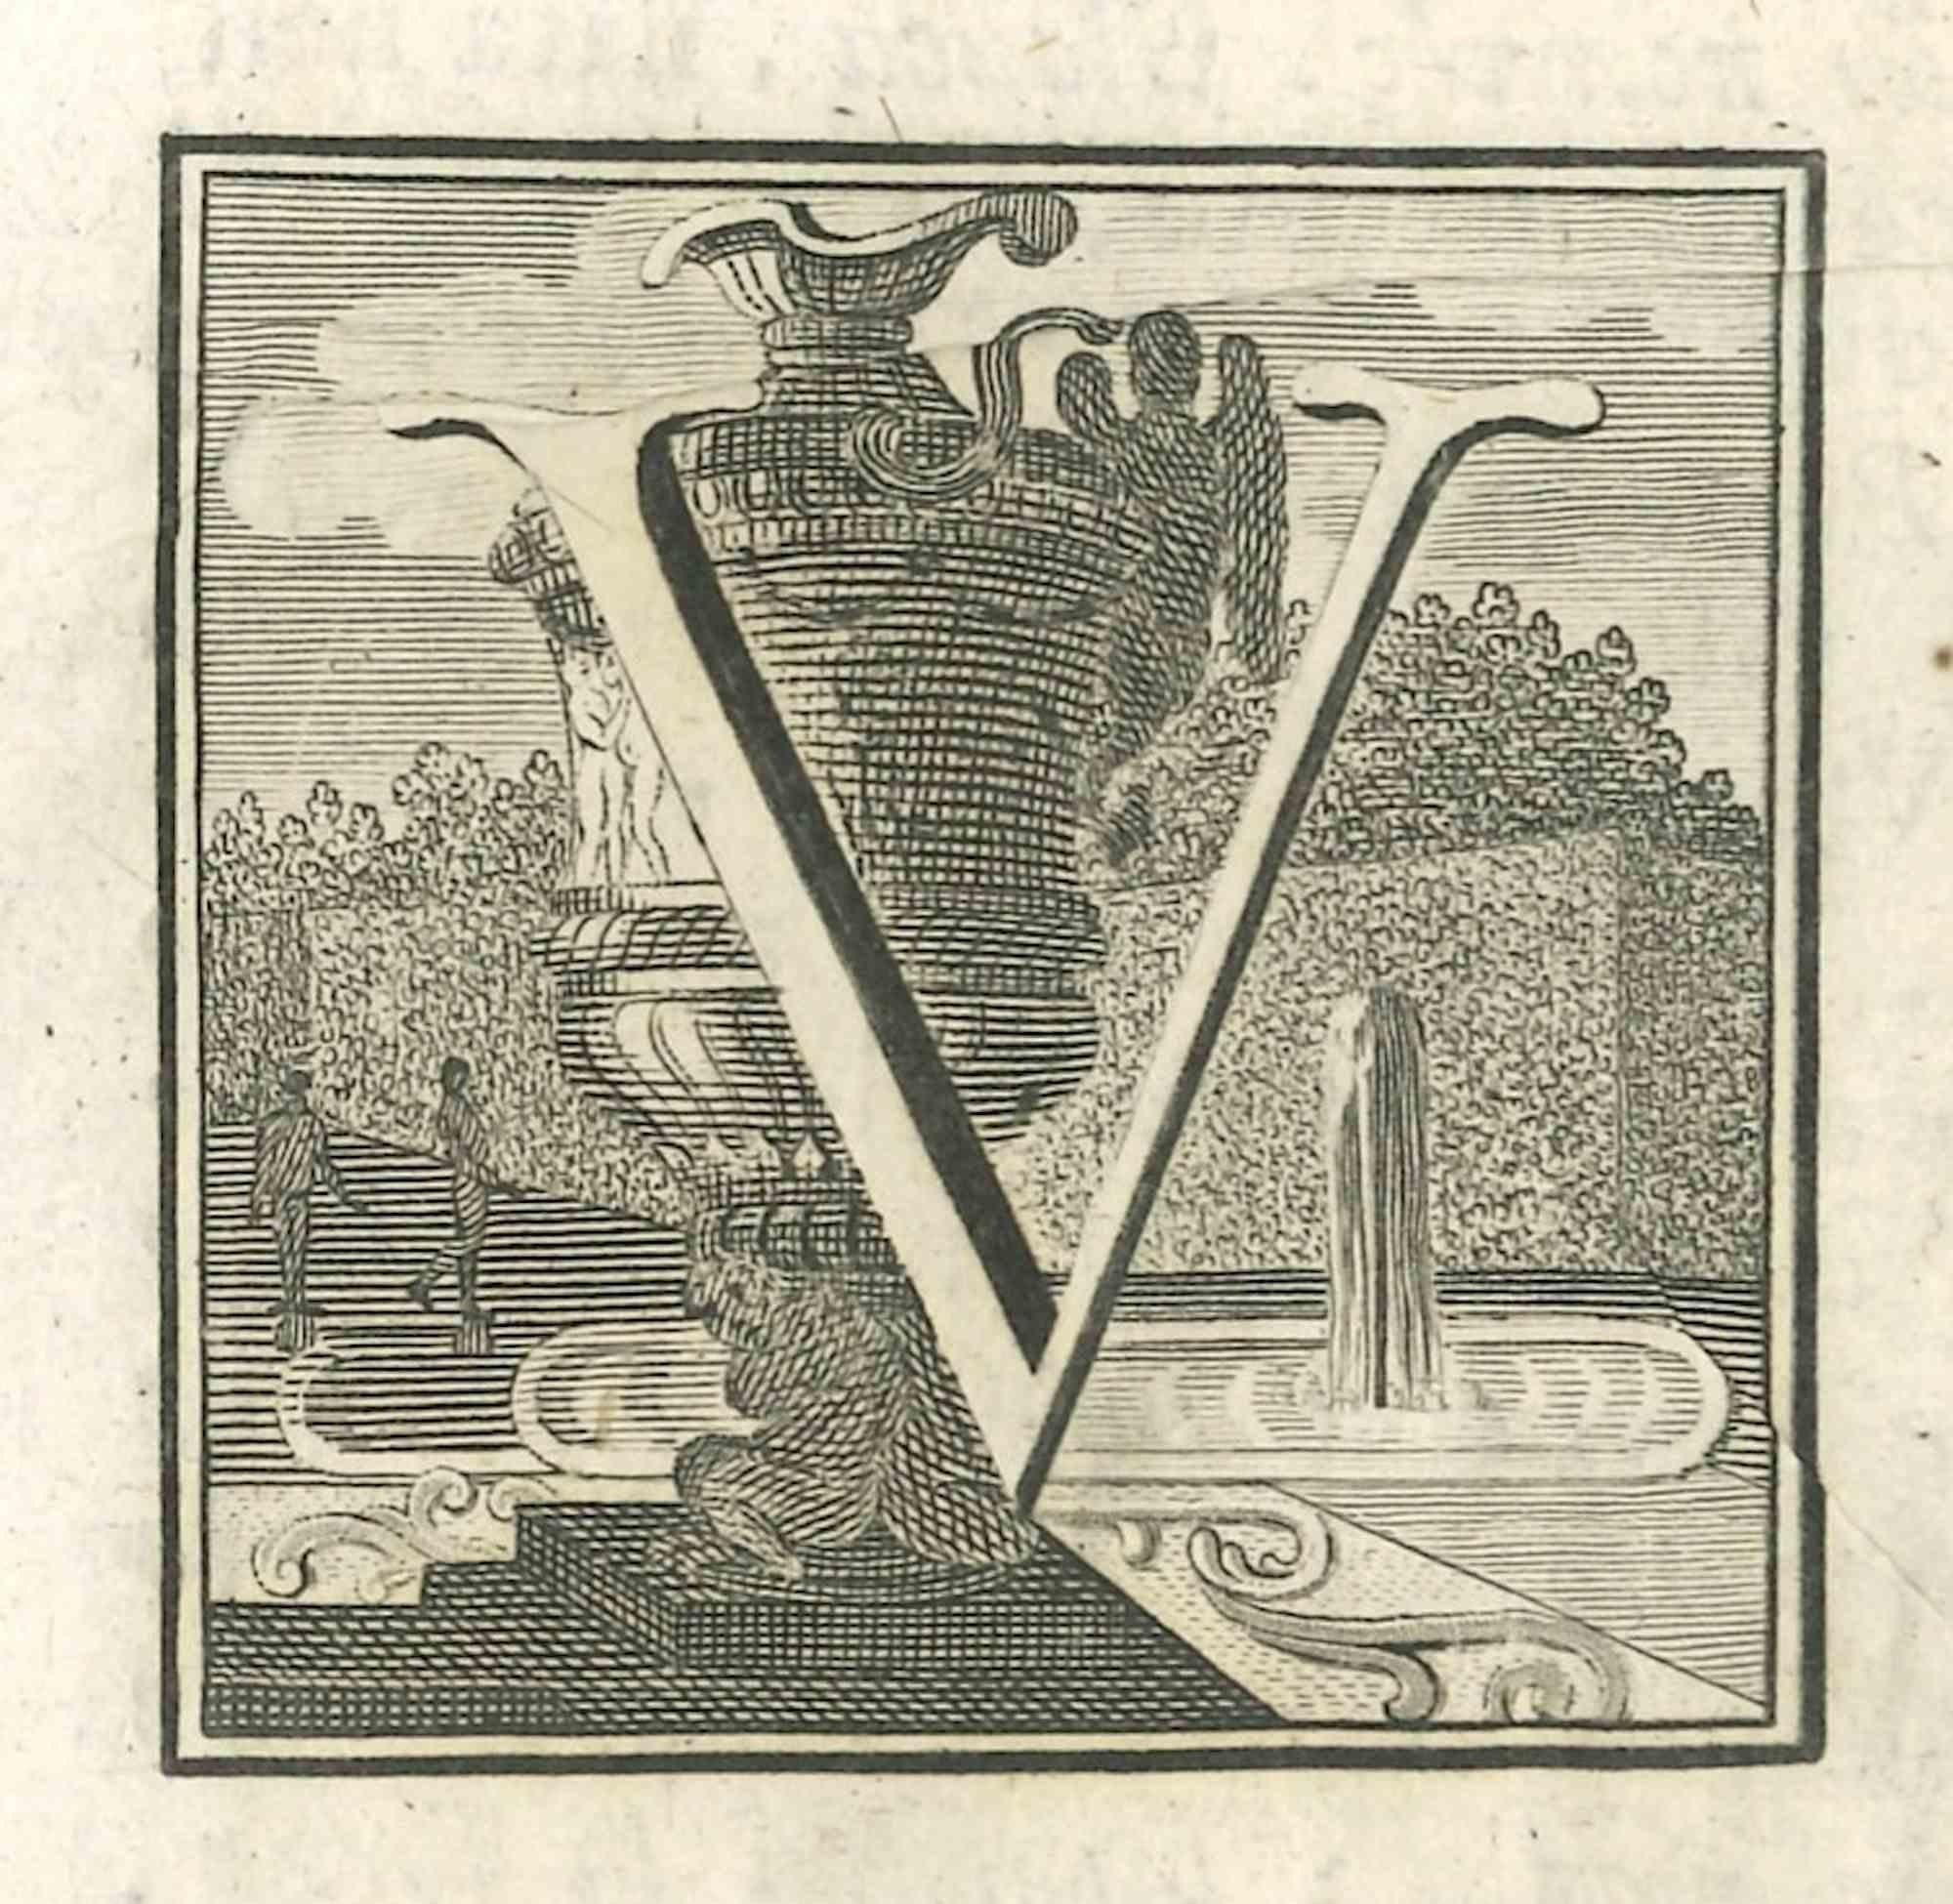 Letter of the Alphabet V,  from the series "Antiquities of Herculaneum", is an etching on paper realized by Various Authors in the 18th century.

Good conditions.

The etching belongs to the print suite “Antiquities of Herculaneum Exposed” (original